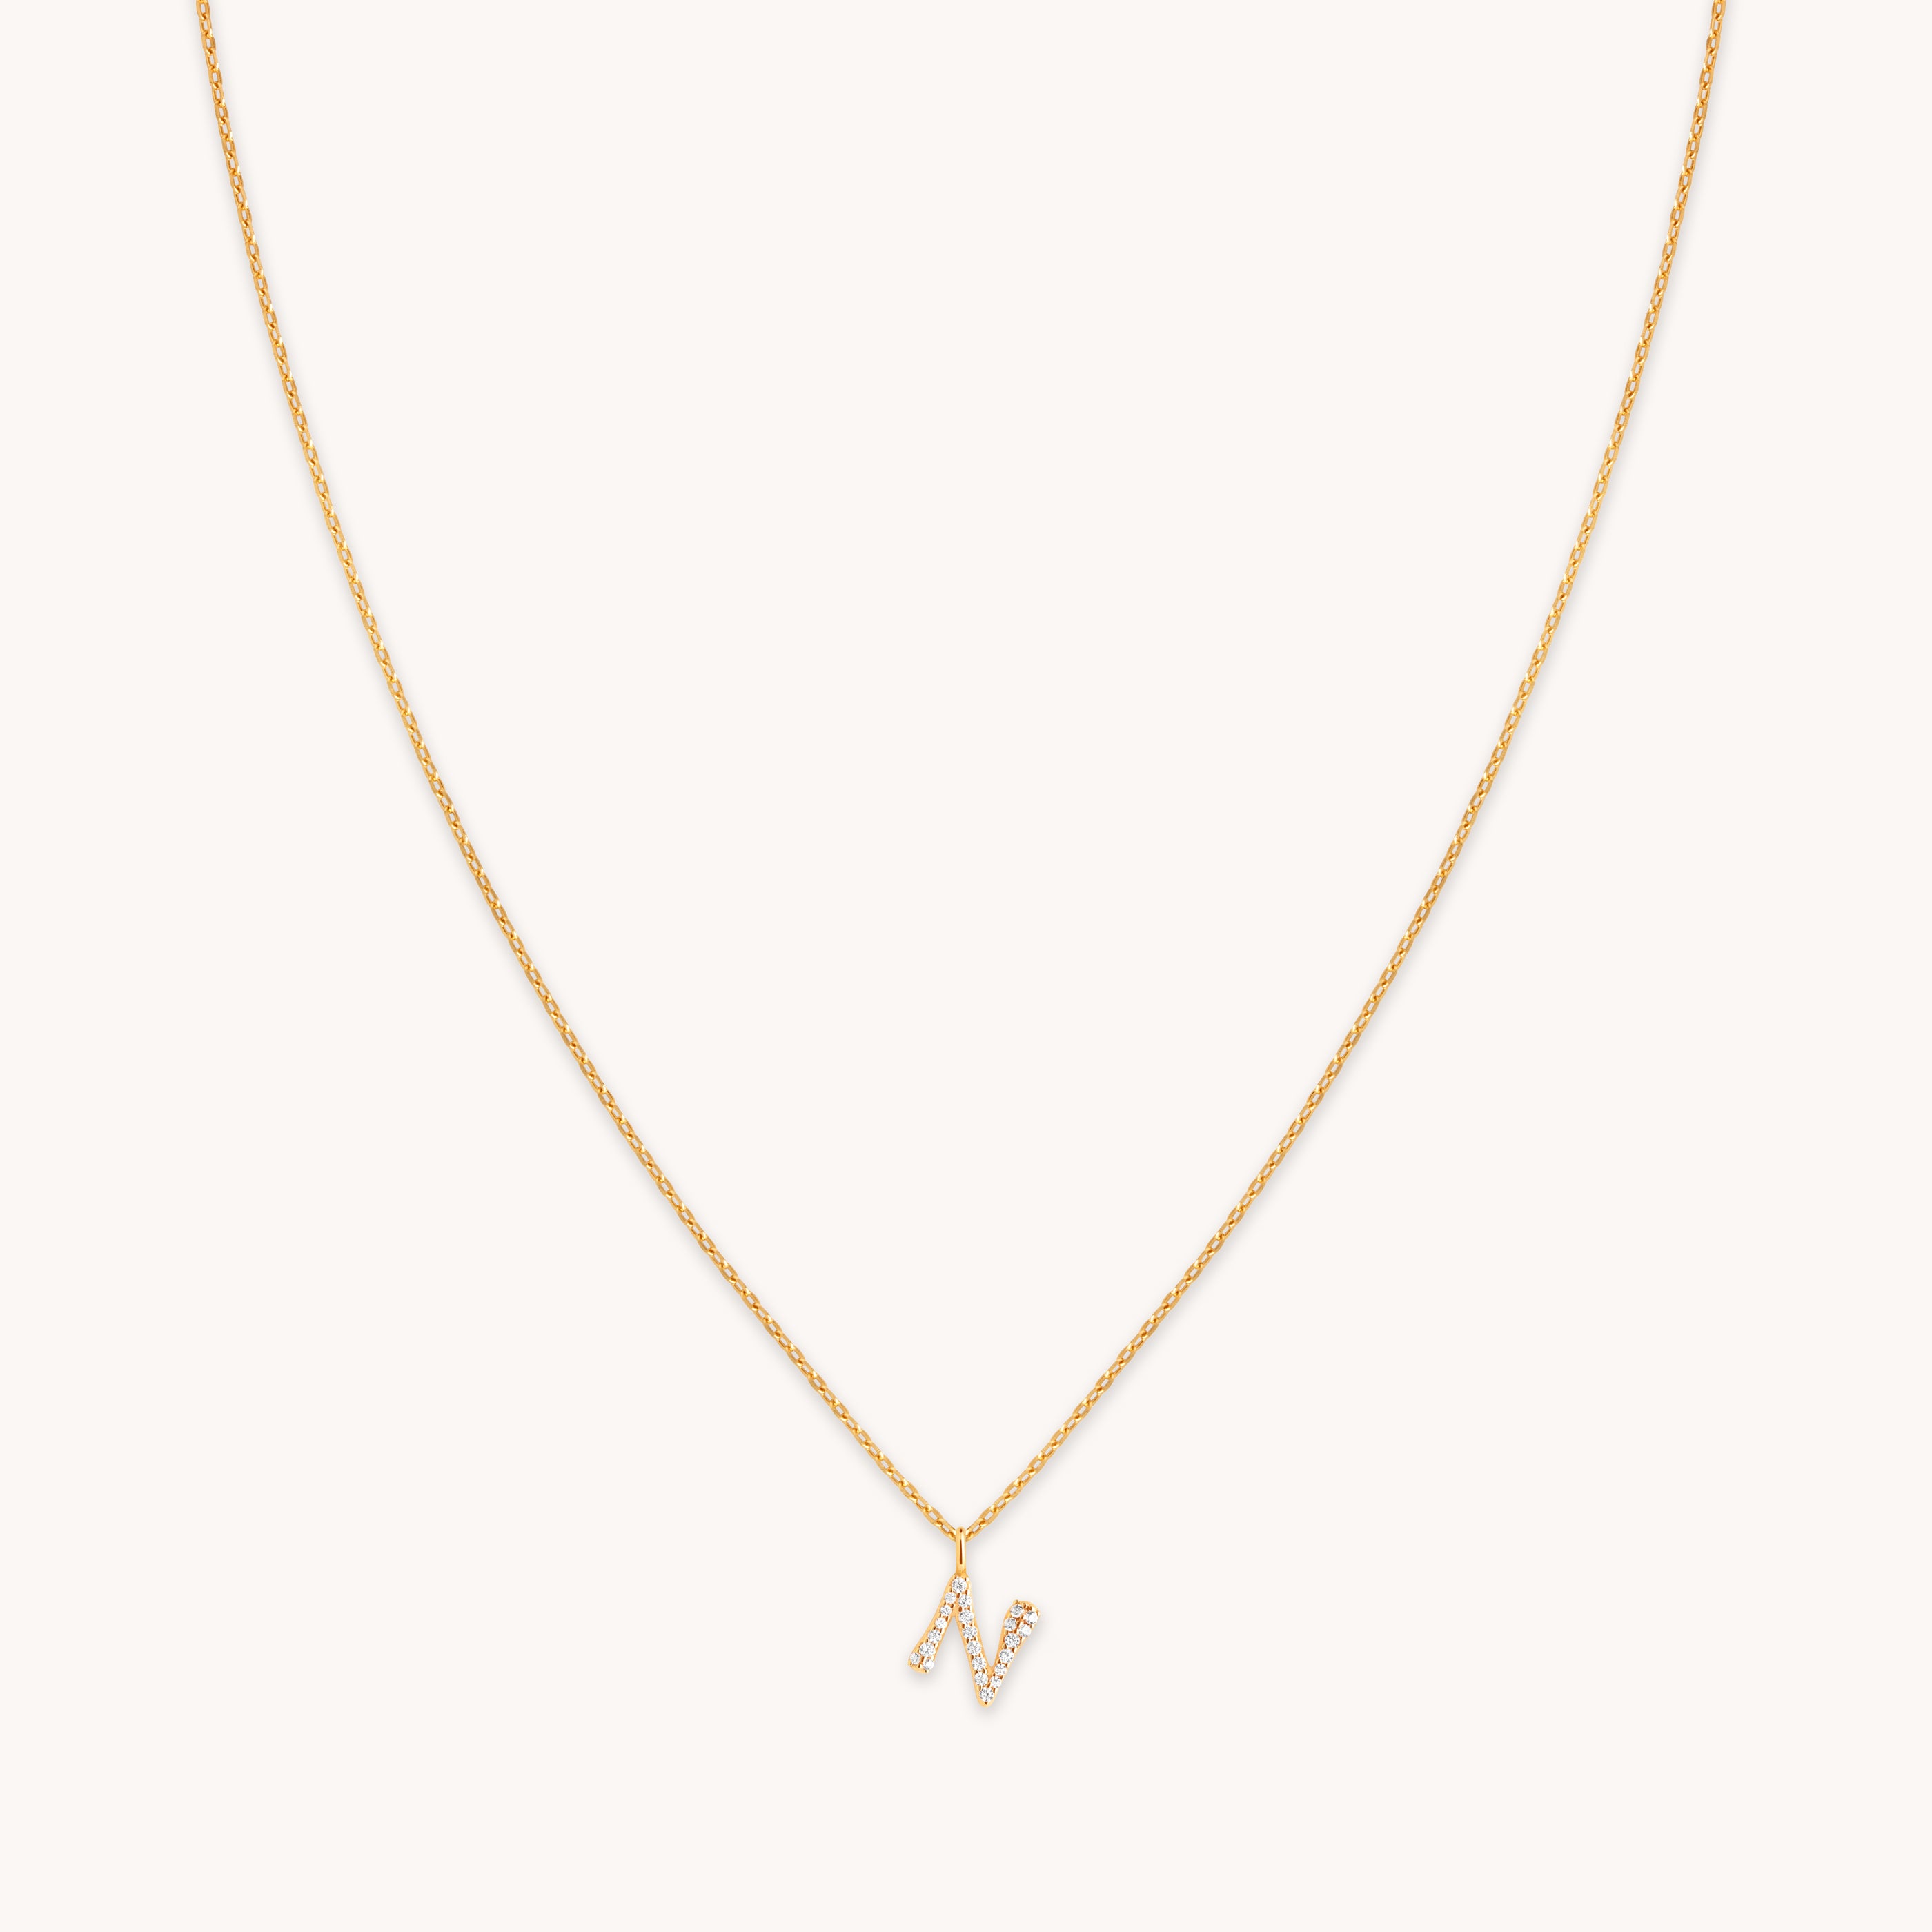 N Initial Pavé Pendant Necklace in Gold